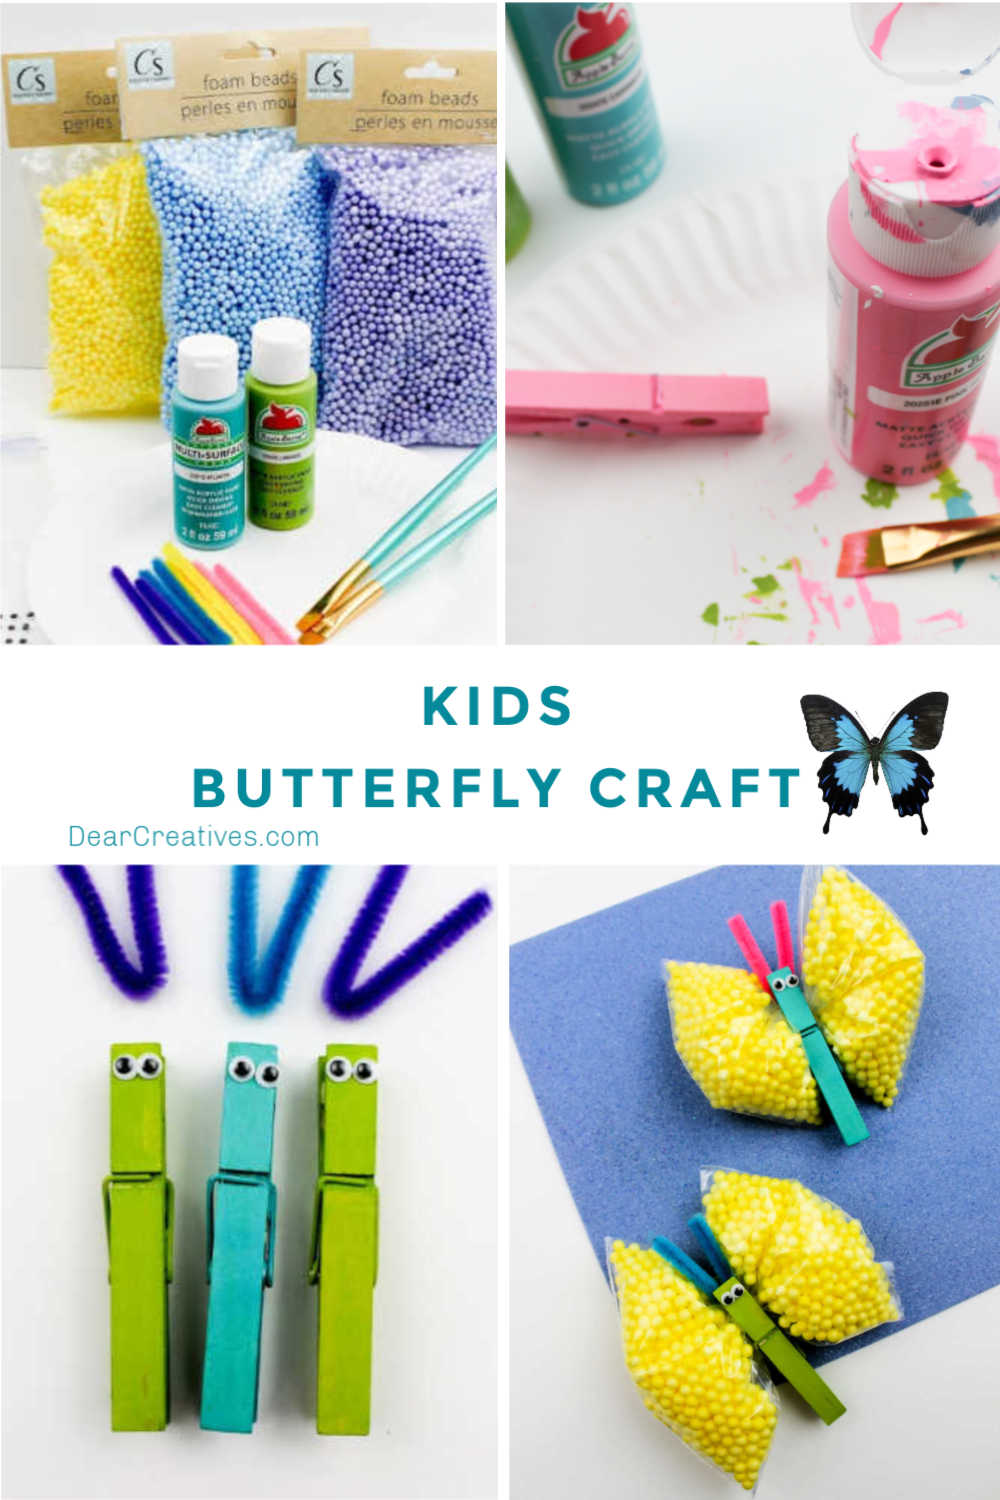 6 Easy Foam Sheet Crafts  DIY Crafts at Home with Foam Sheets 